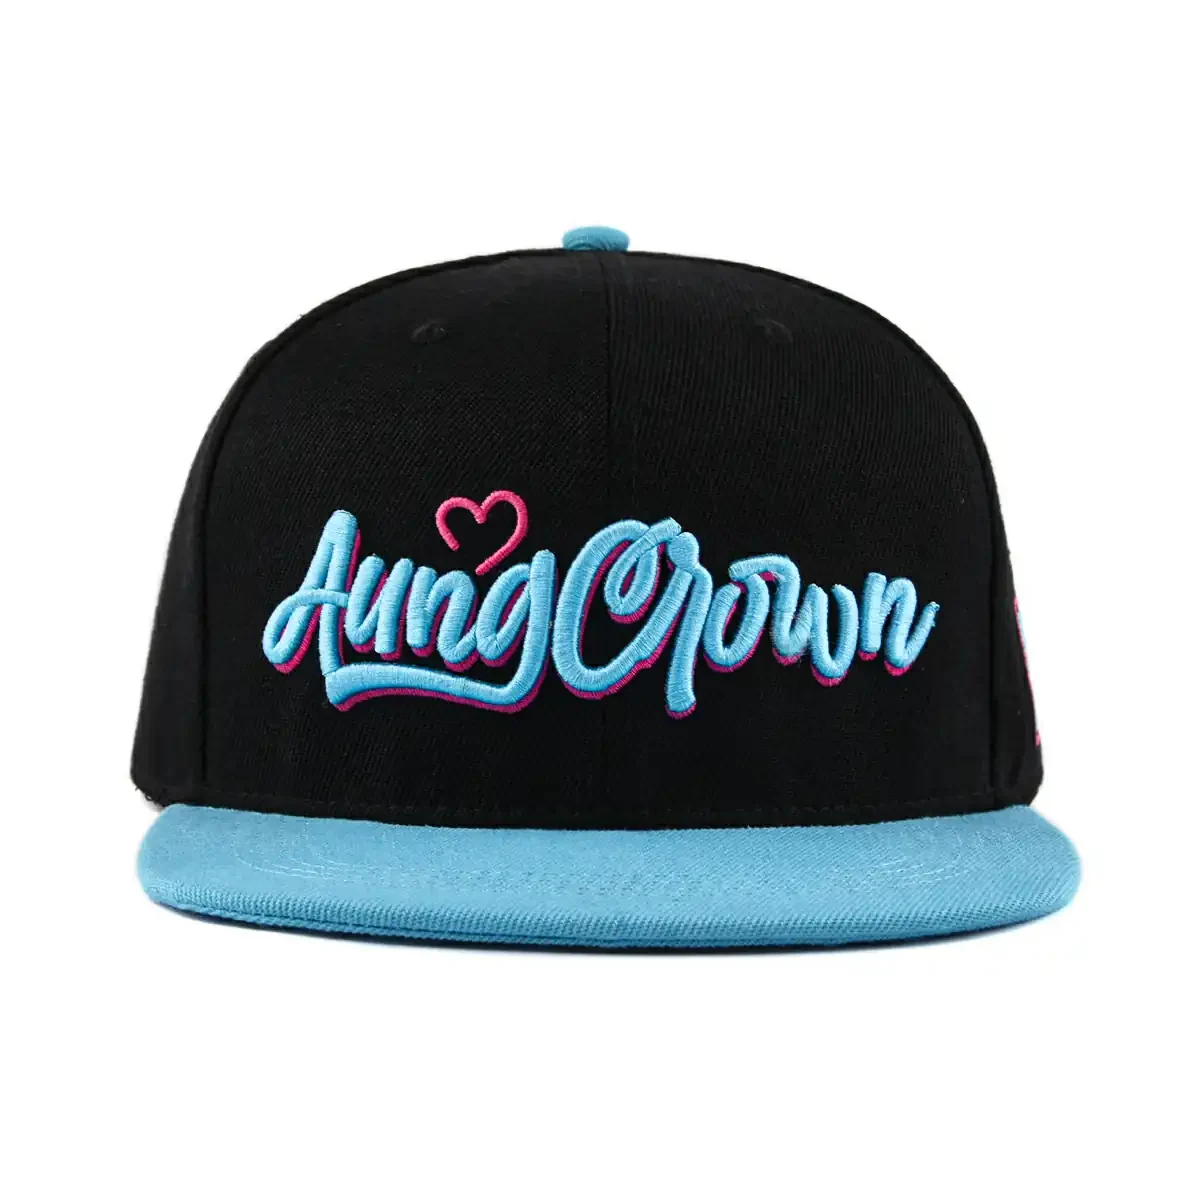 Aung-Crown-fashion-blue-black-snapback-cap-for-women-and-men-SFG-220402-1